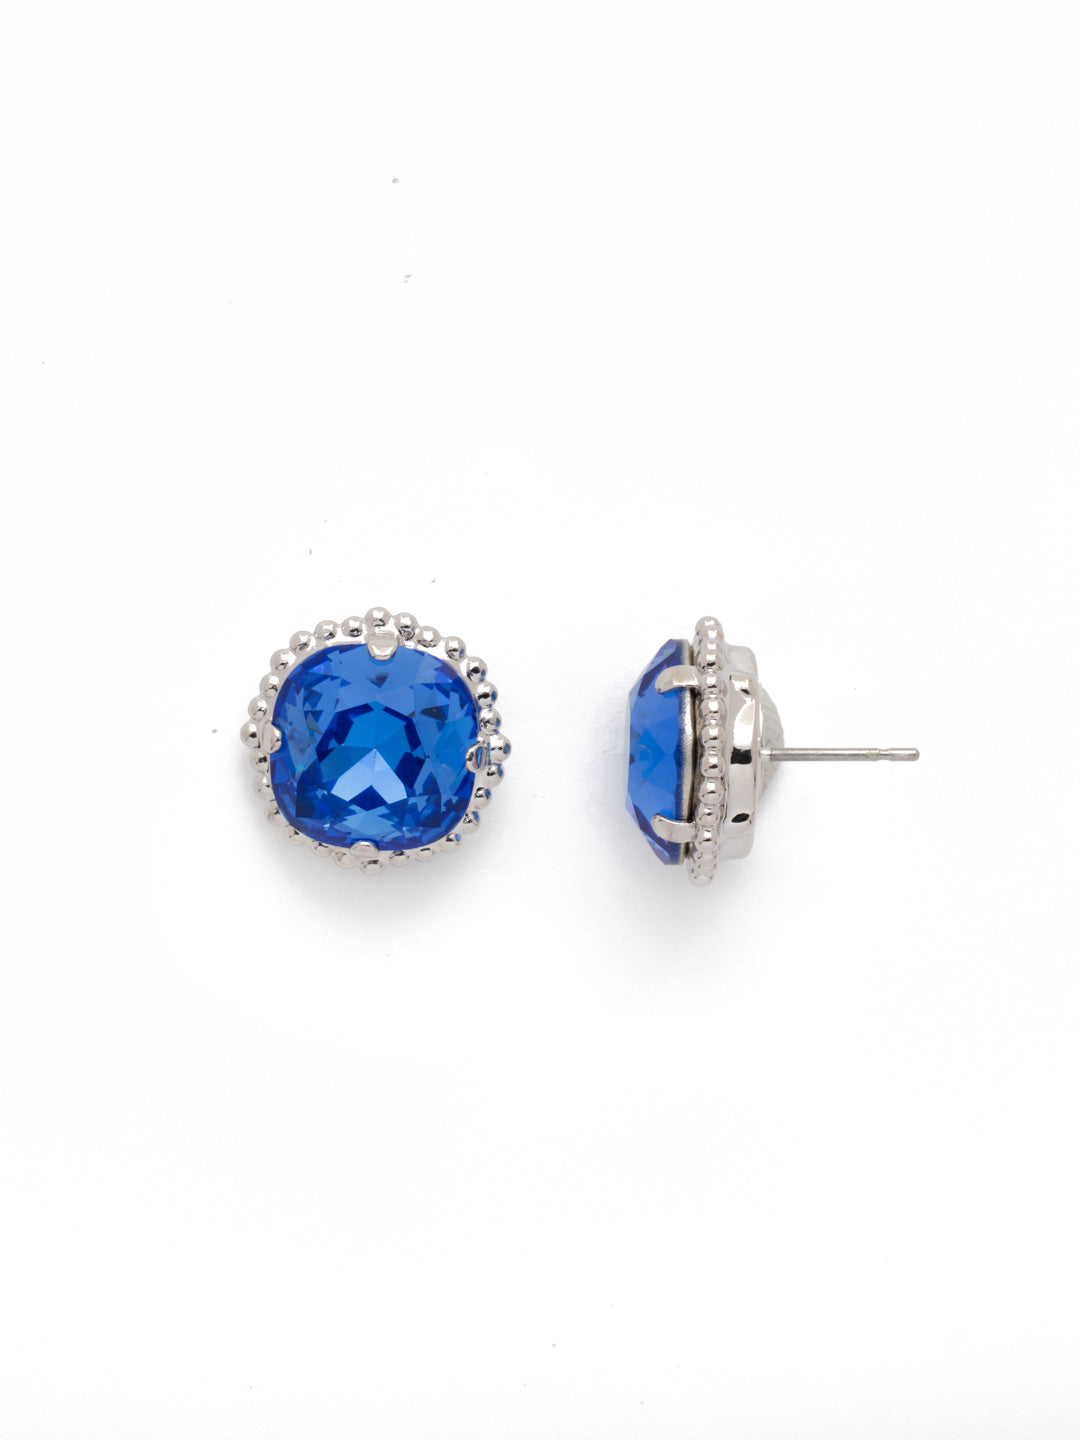 Cushion-Cut Solitaire Stud Earrings - EBX10RHSAP - All around allure; the Cushion-Cut Solitaire Stud Earring features a rounded-edge, cushion cut stone that is encircled by a vintage inspired decorative, edged border. A post backing ensures comfortable, everyday wear. From Sorrelli's Sapphire collection in our Palladium Silver-tone finish.